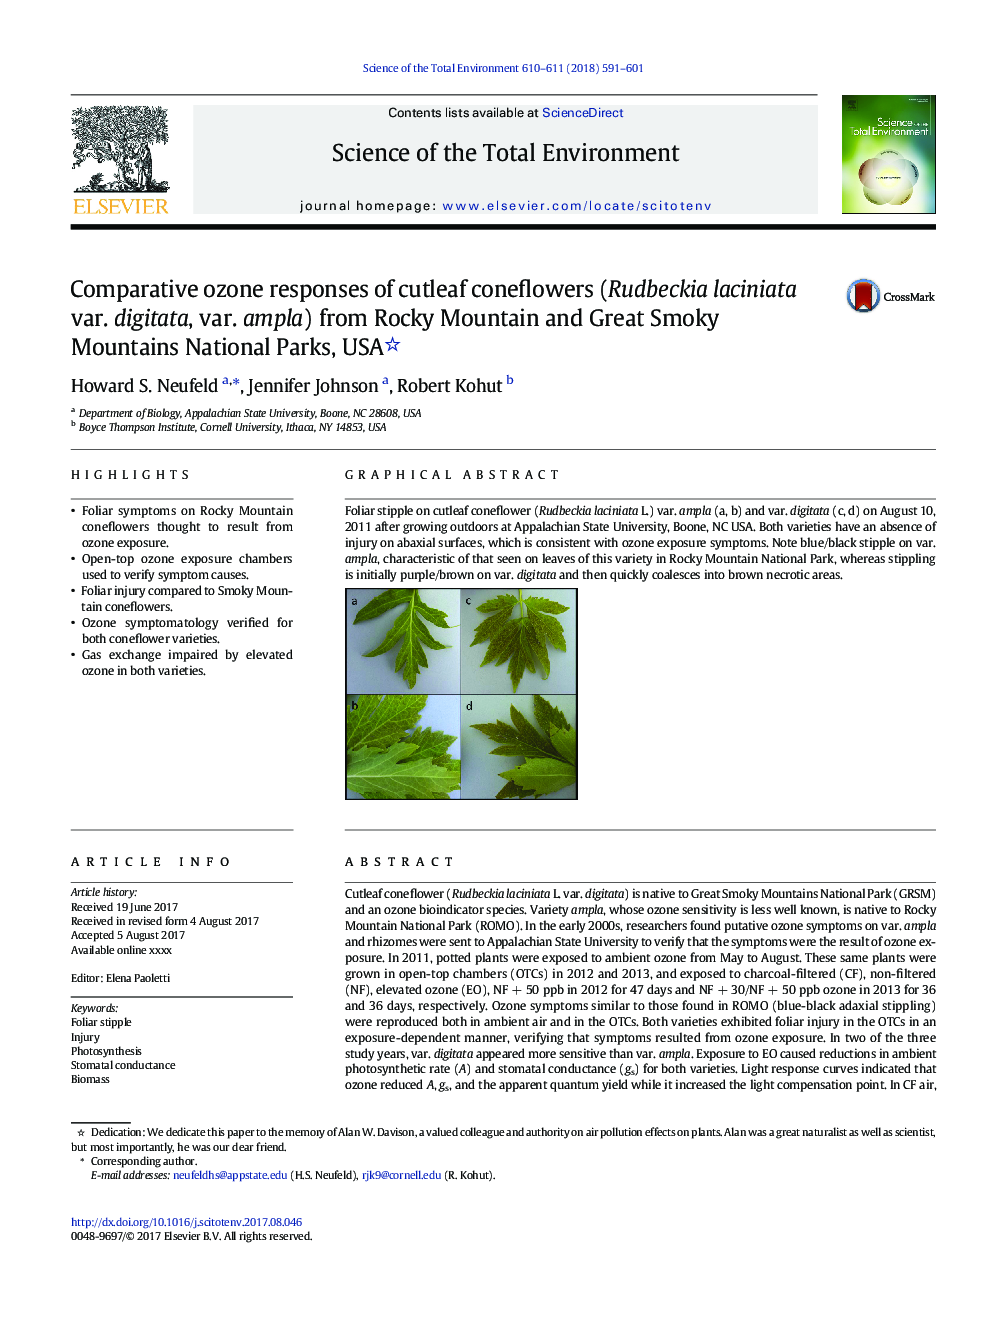 Comparative ozone responses of cutleaf coneflowers (Rudbeckia laciniata var. digitata, var. ampla) from Rocky Mountain and Great Smoky Mountains National Parks, USA